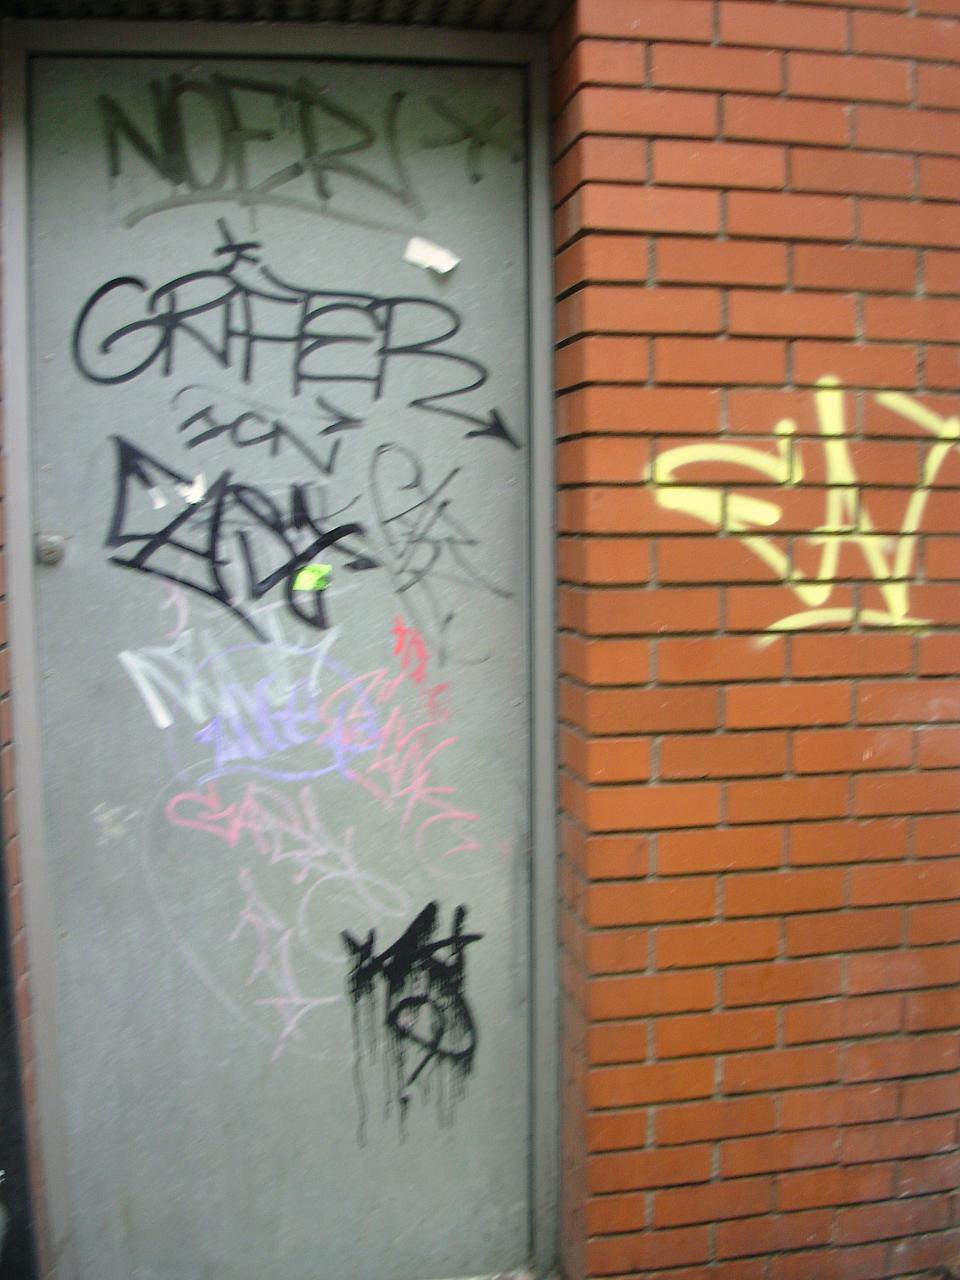 graffiti written on a door on the side of a building